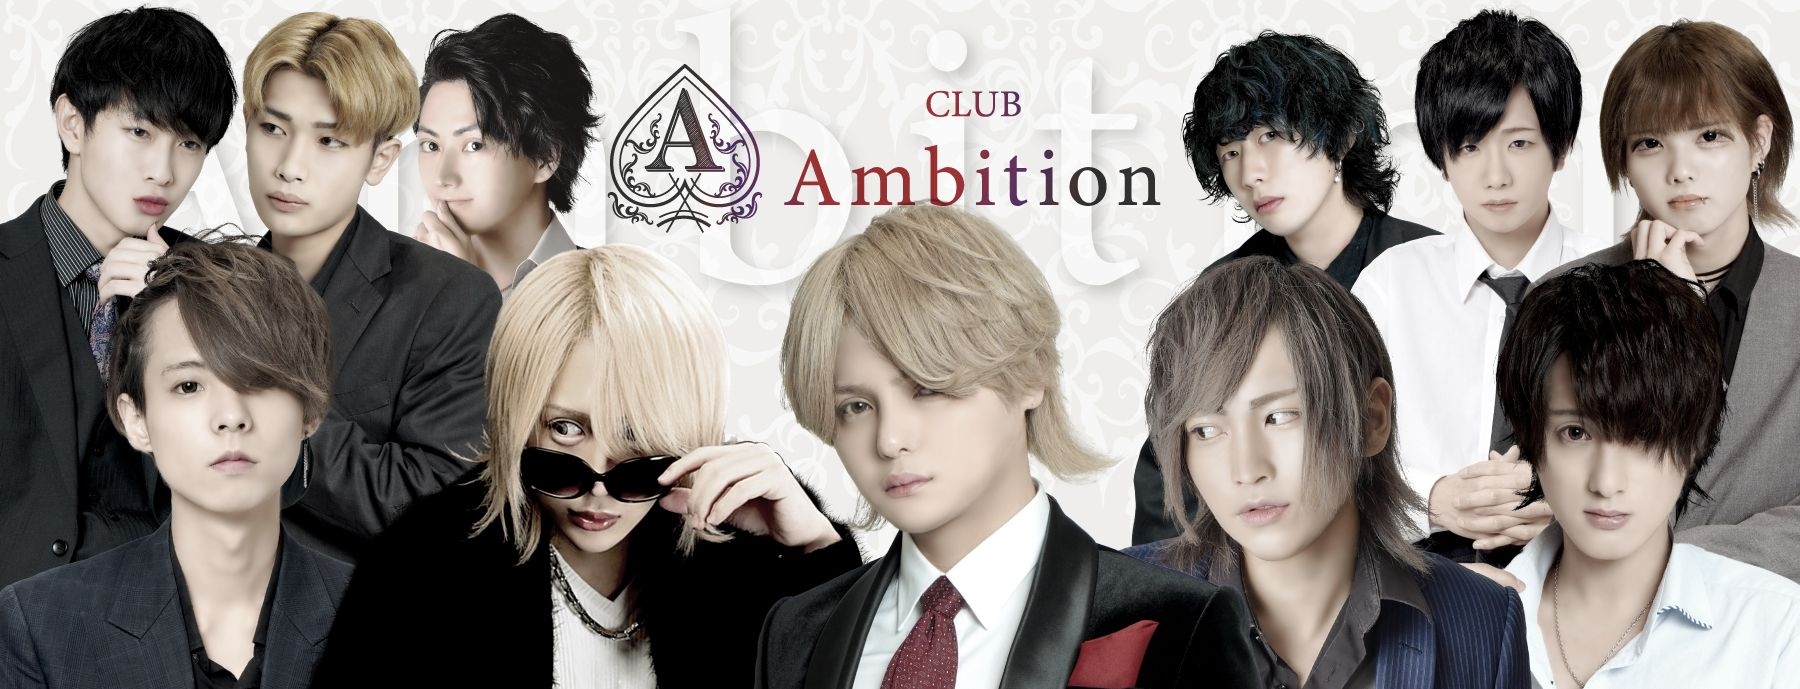 CLUB Ambition 〜アンビション〜